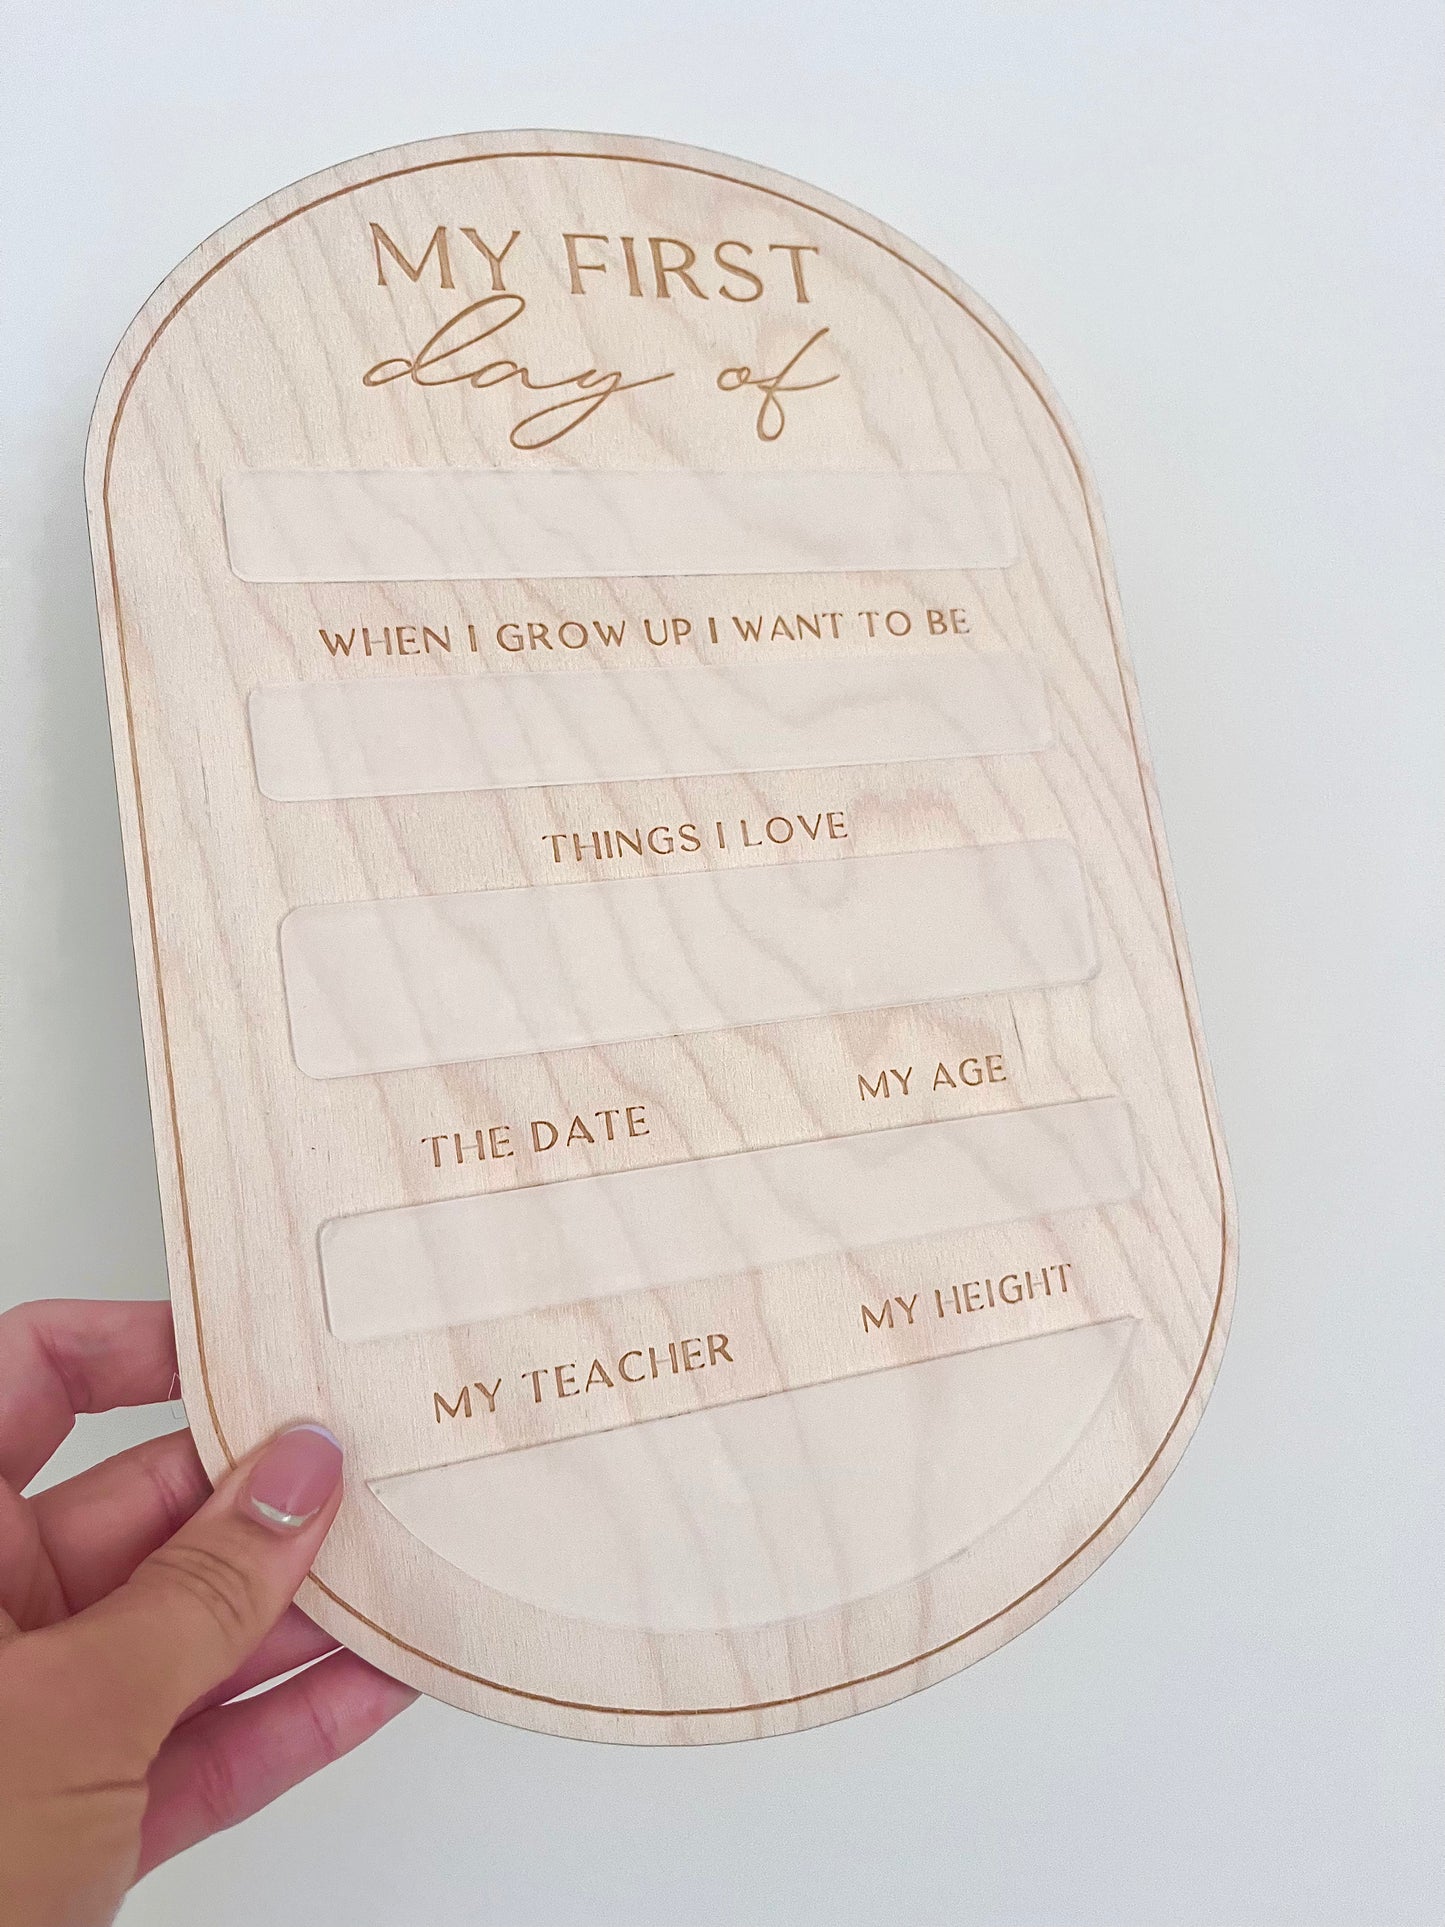 First day board - oval shape with frosted acrylic